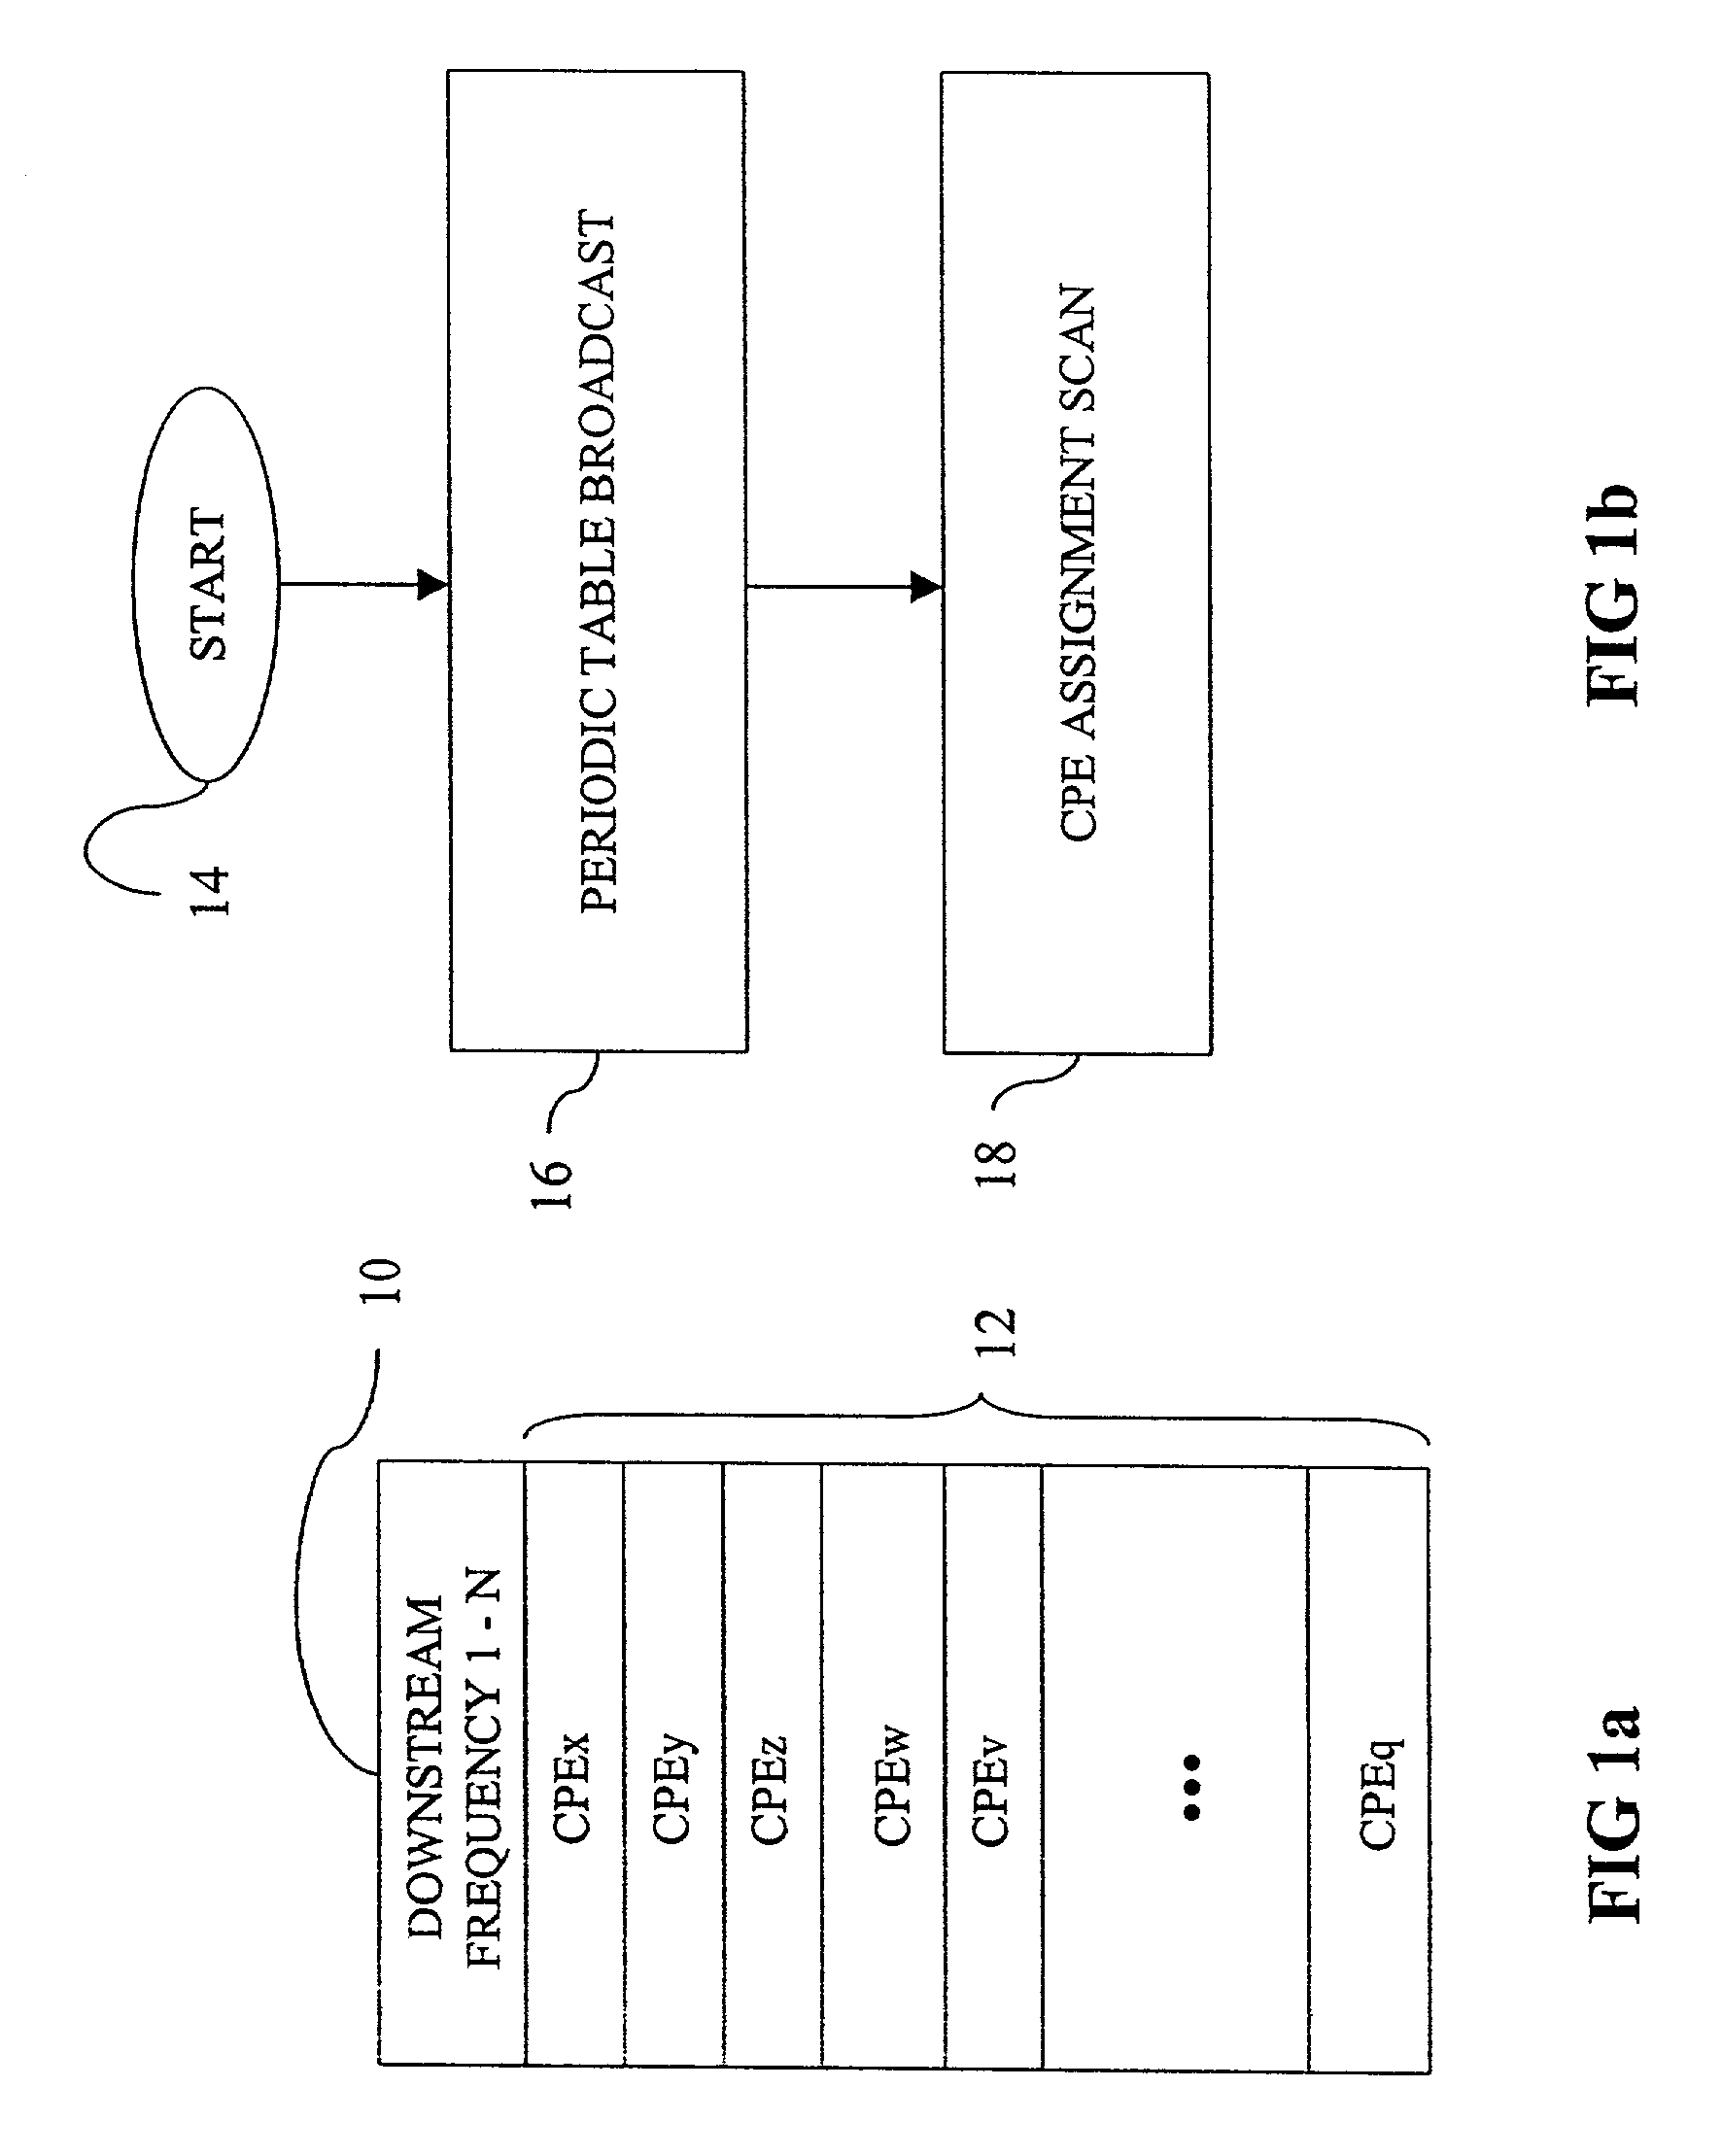 Common control channel dynamic frequency assignment method and protocol